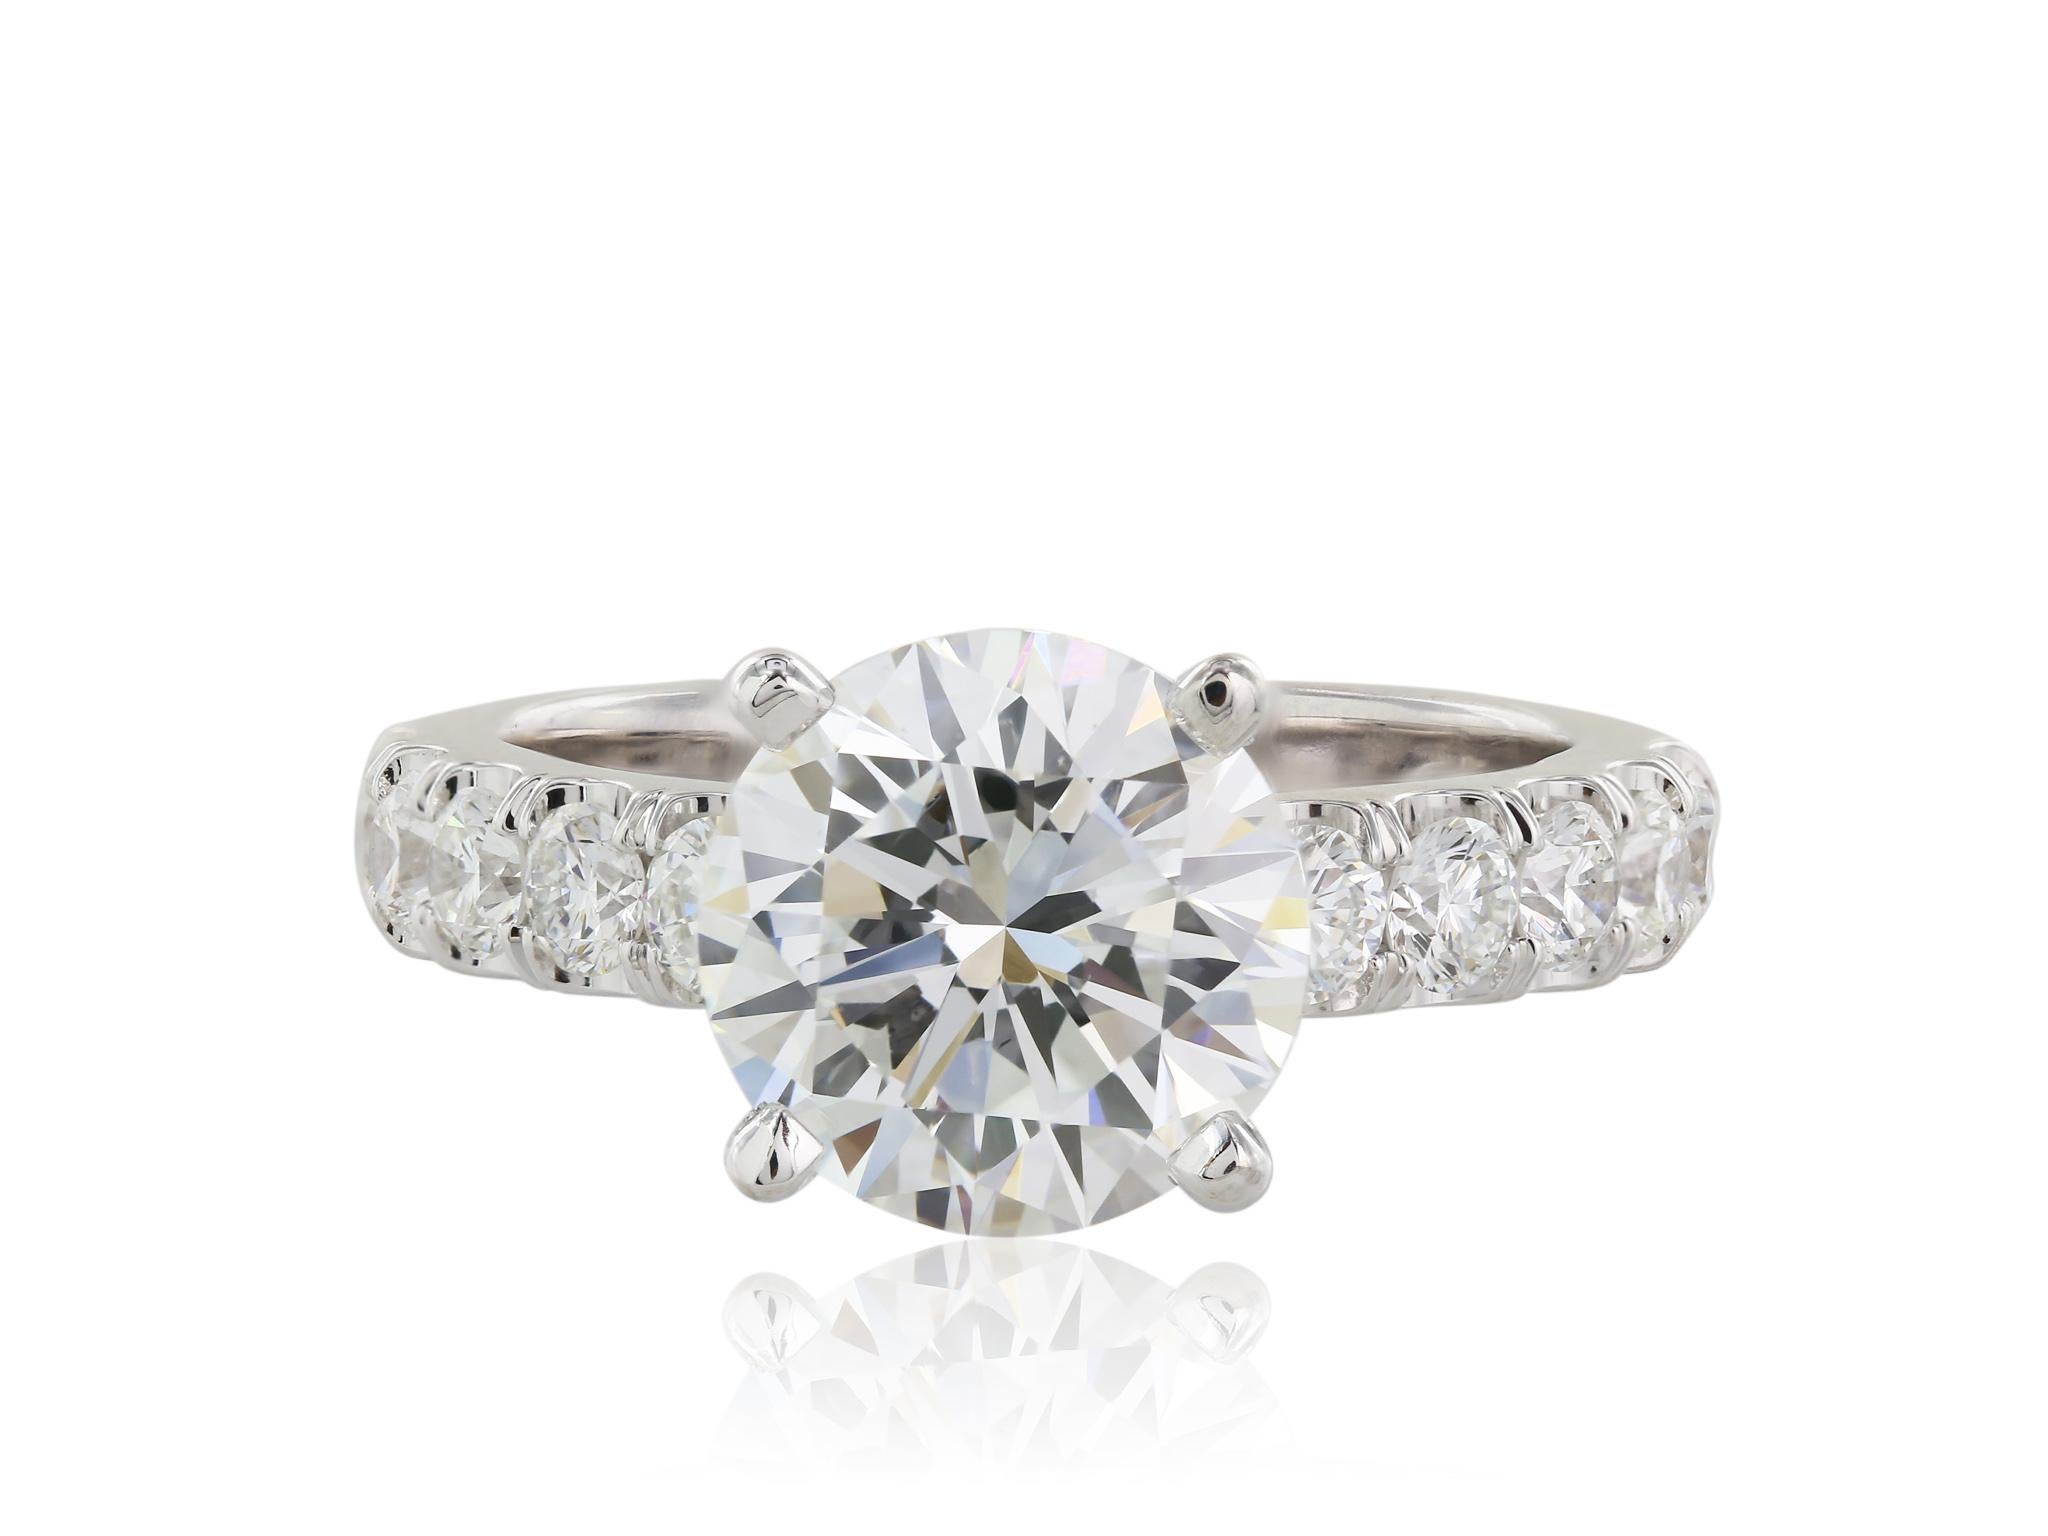 Round Cut 3.03 Carat GIA Certified Diamond Engagement Ring For Sale